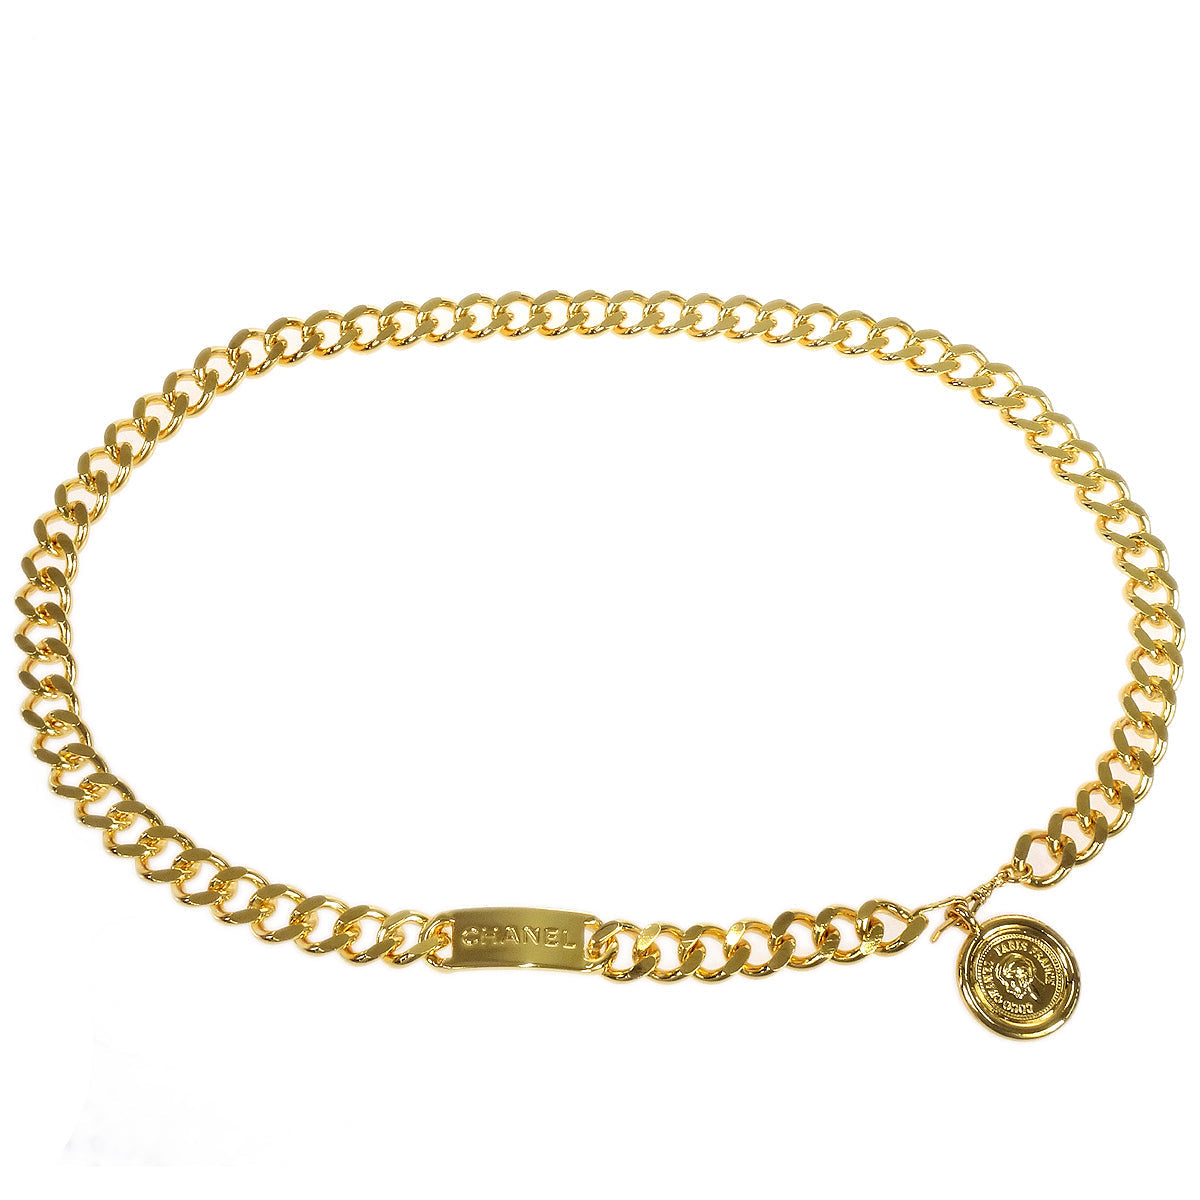 CHANEL Medallion Gold Chain Belt 94A Small Good 27793